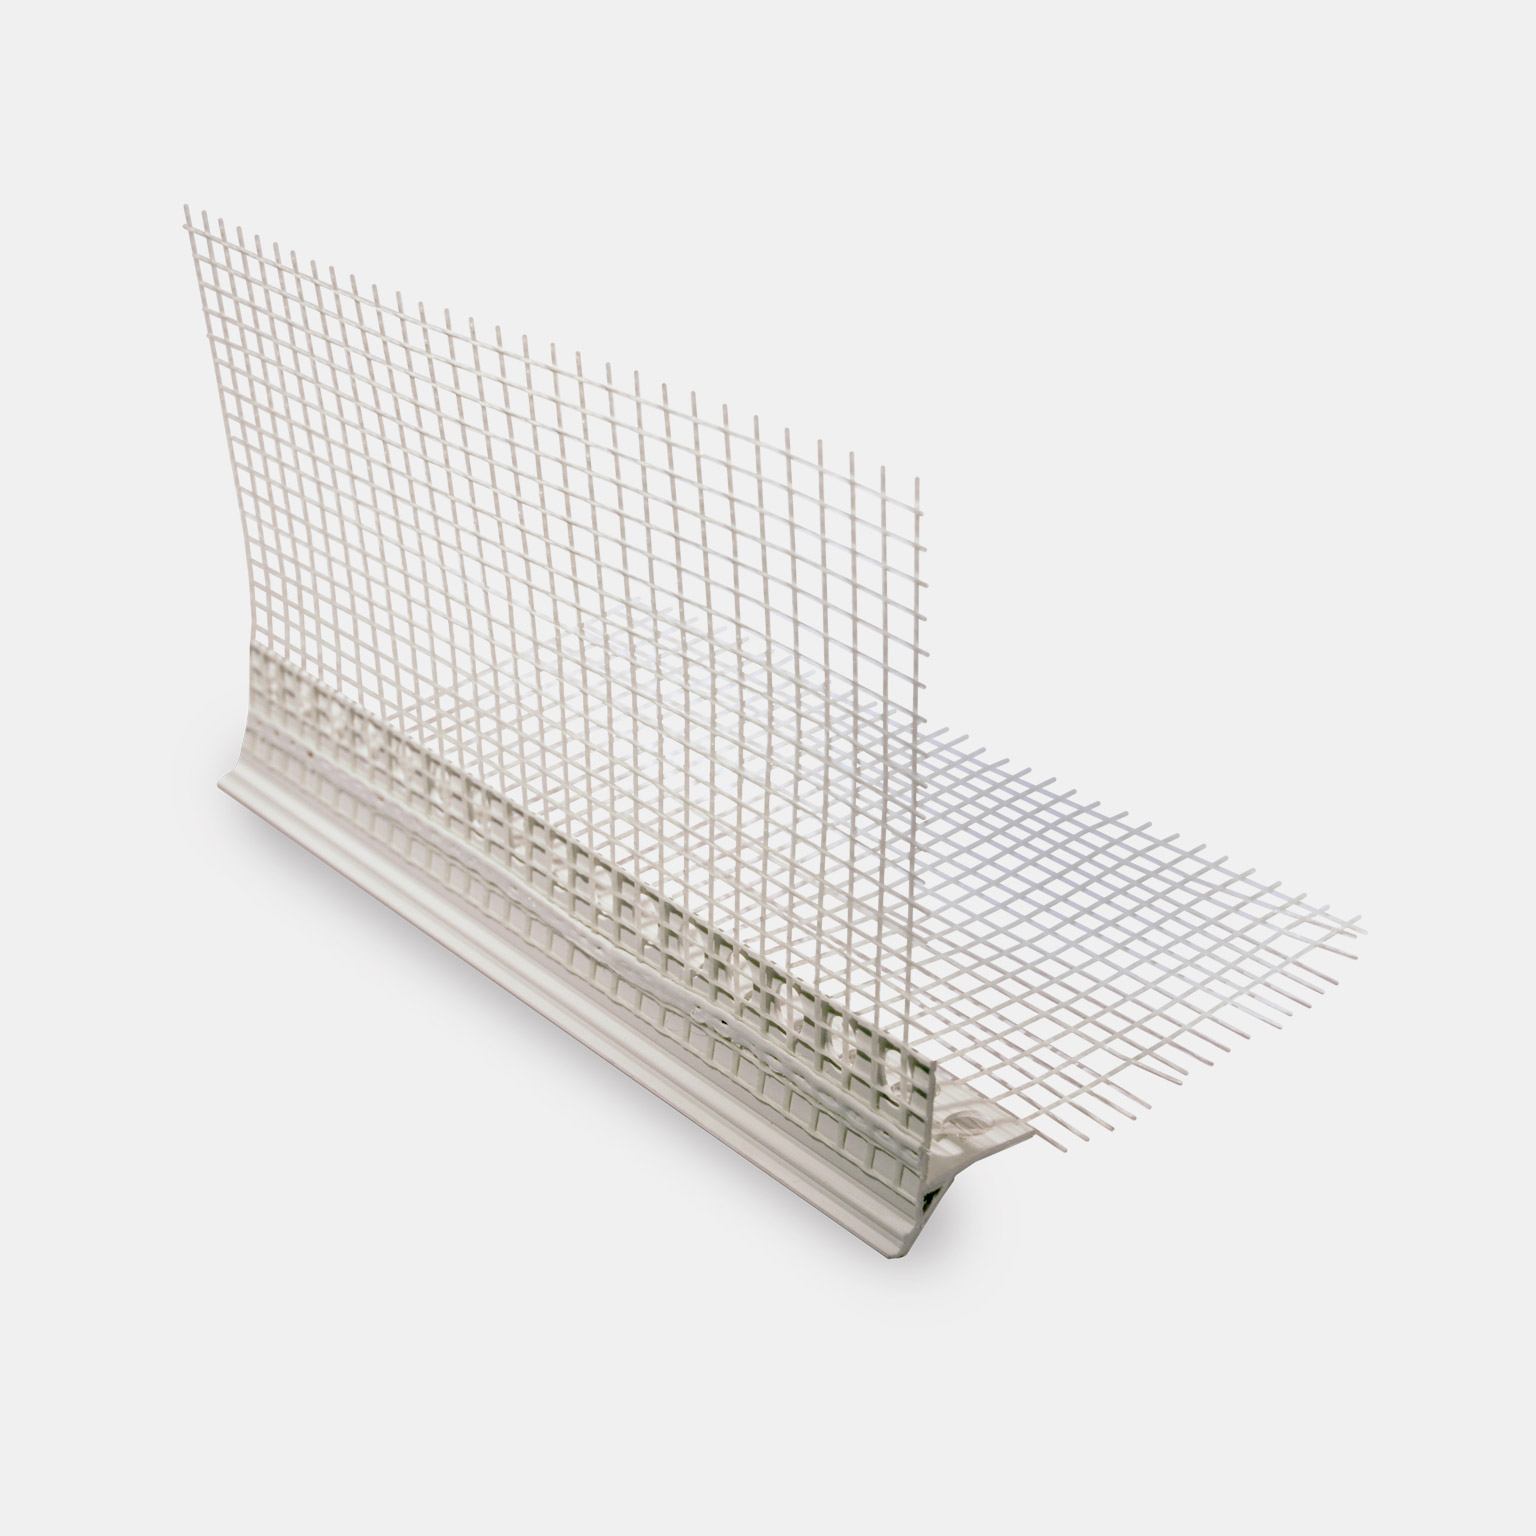 CERESIT DRIP PROFILE WITH MESH 100x100x2500mm